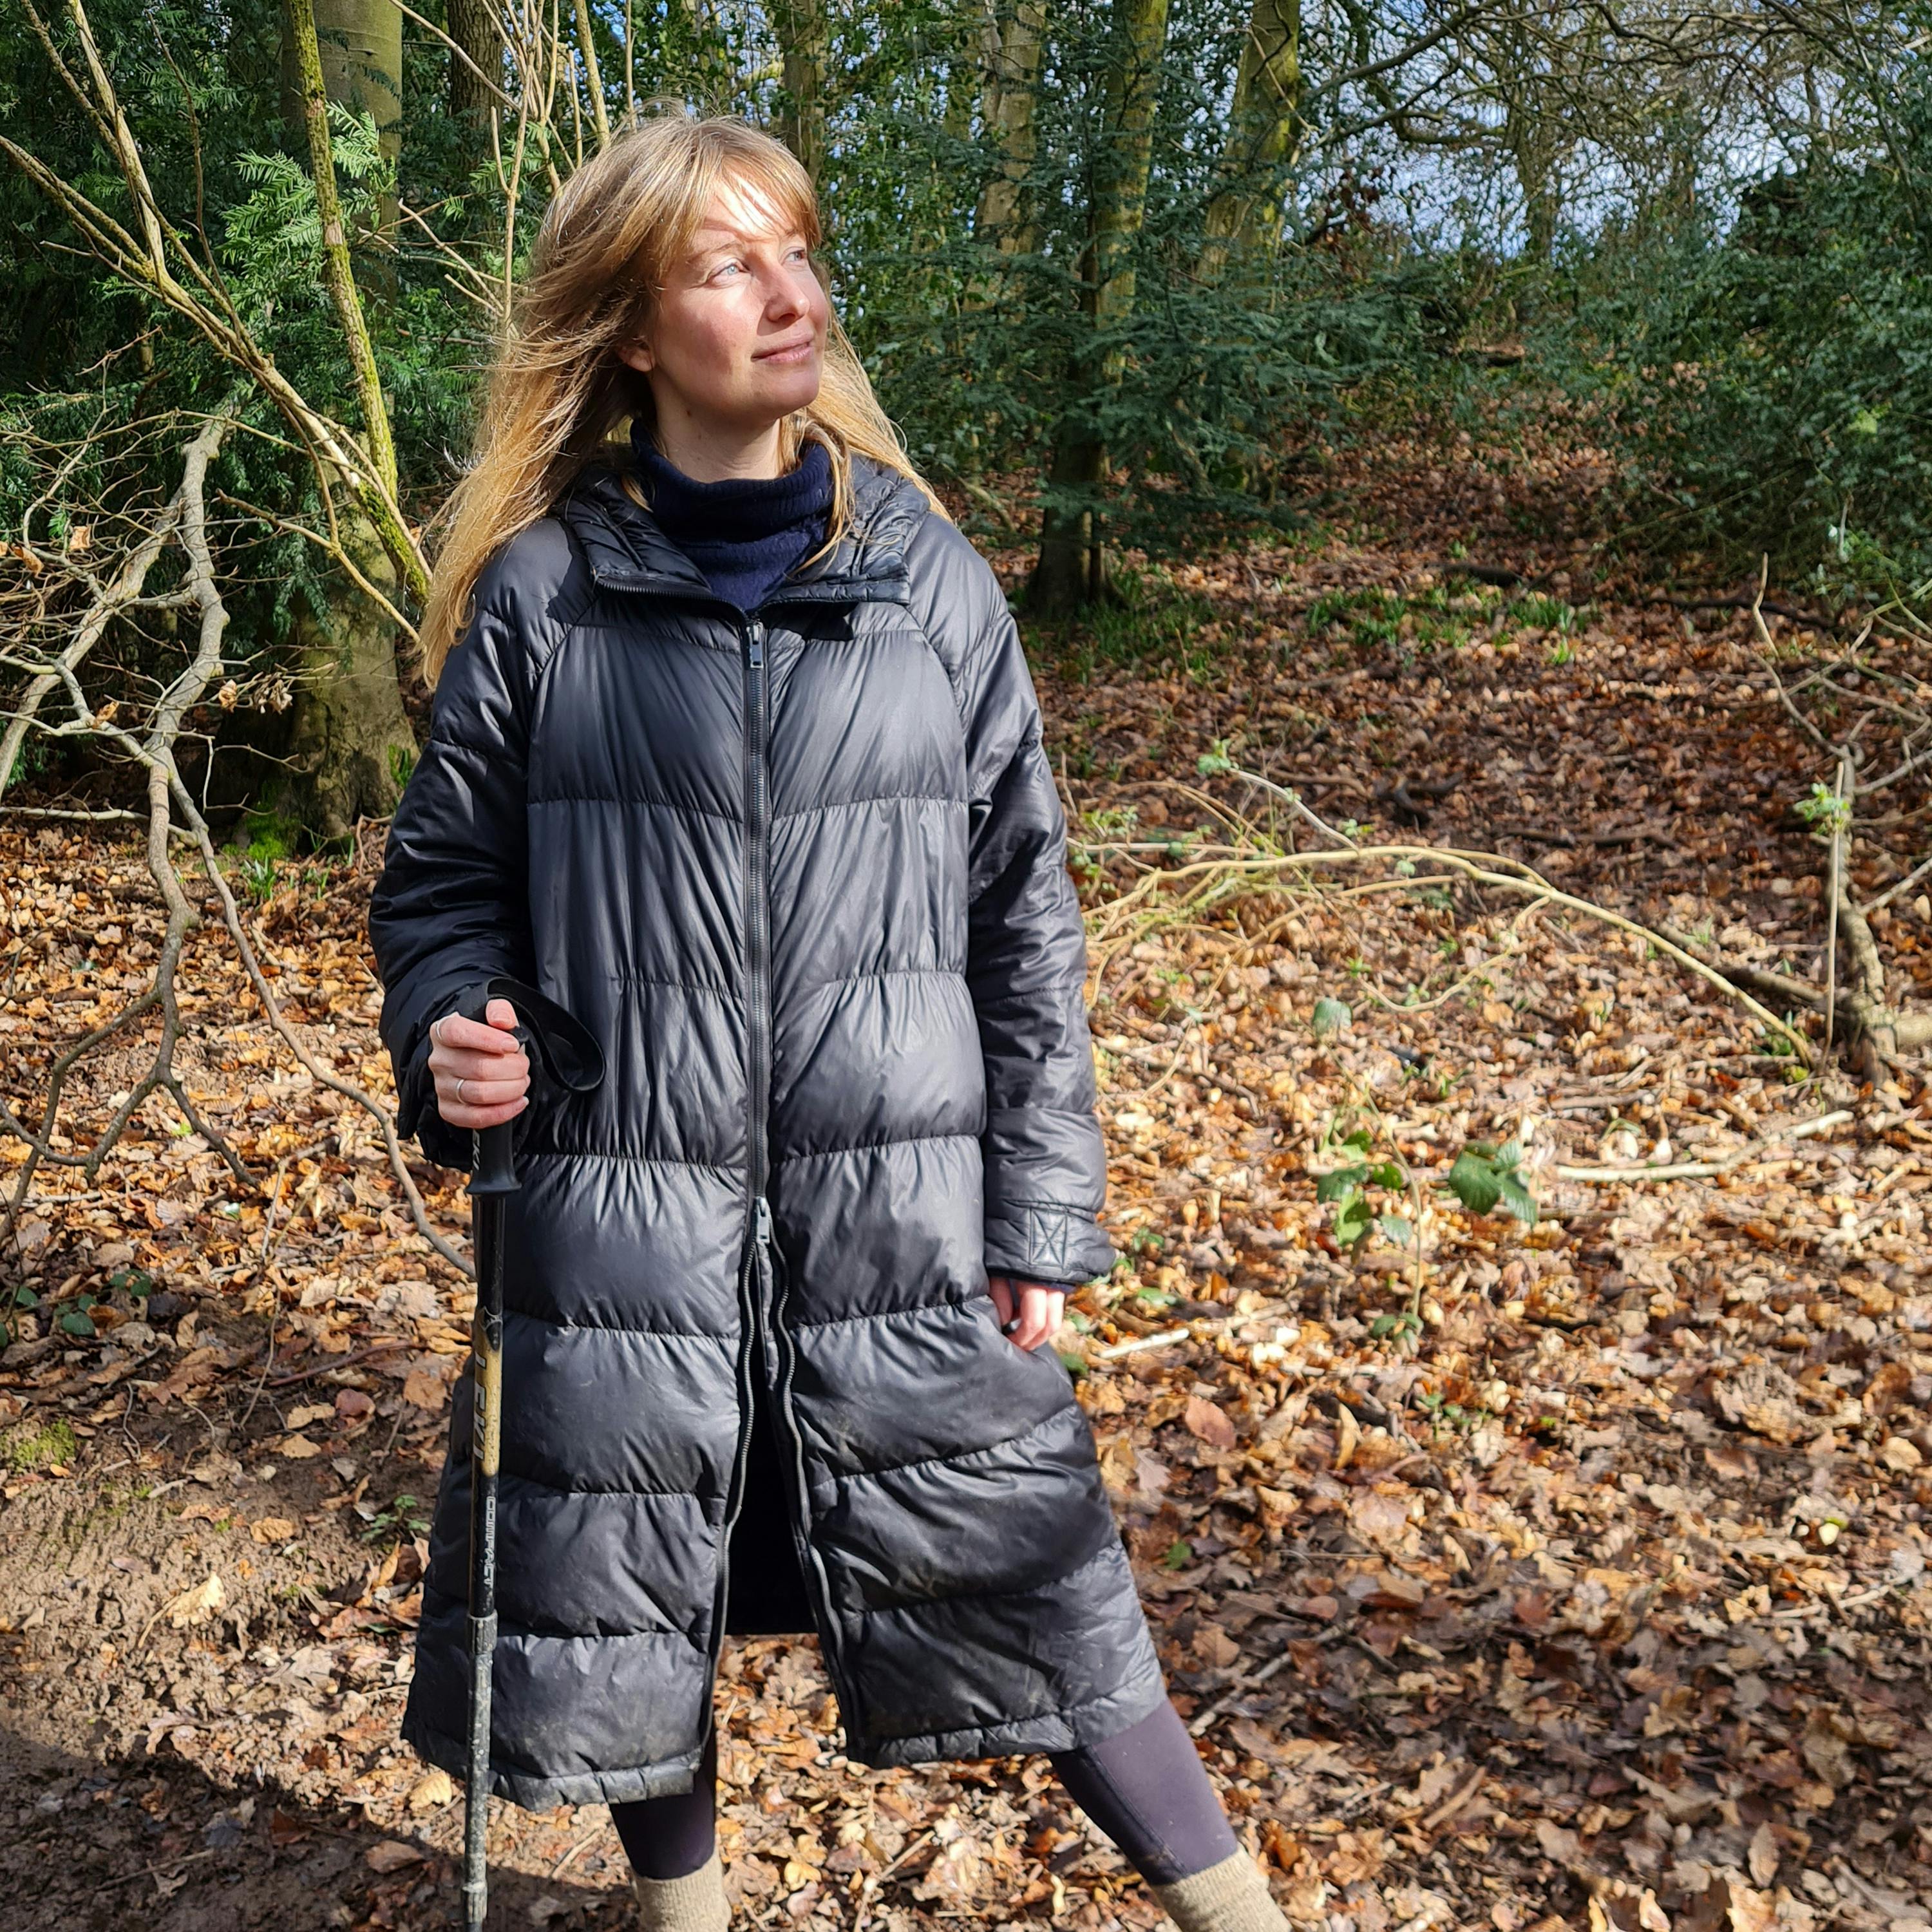 246. A quest for greater access to the countryside for people with disabilities